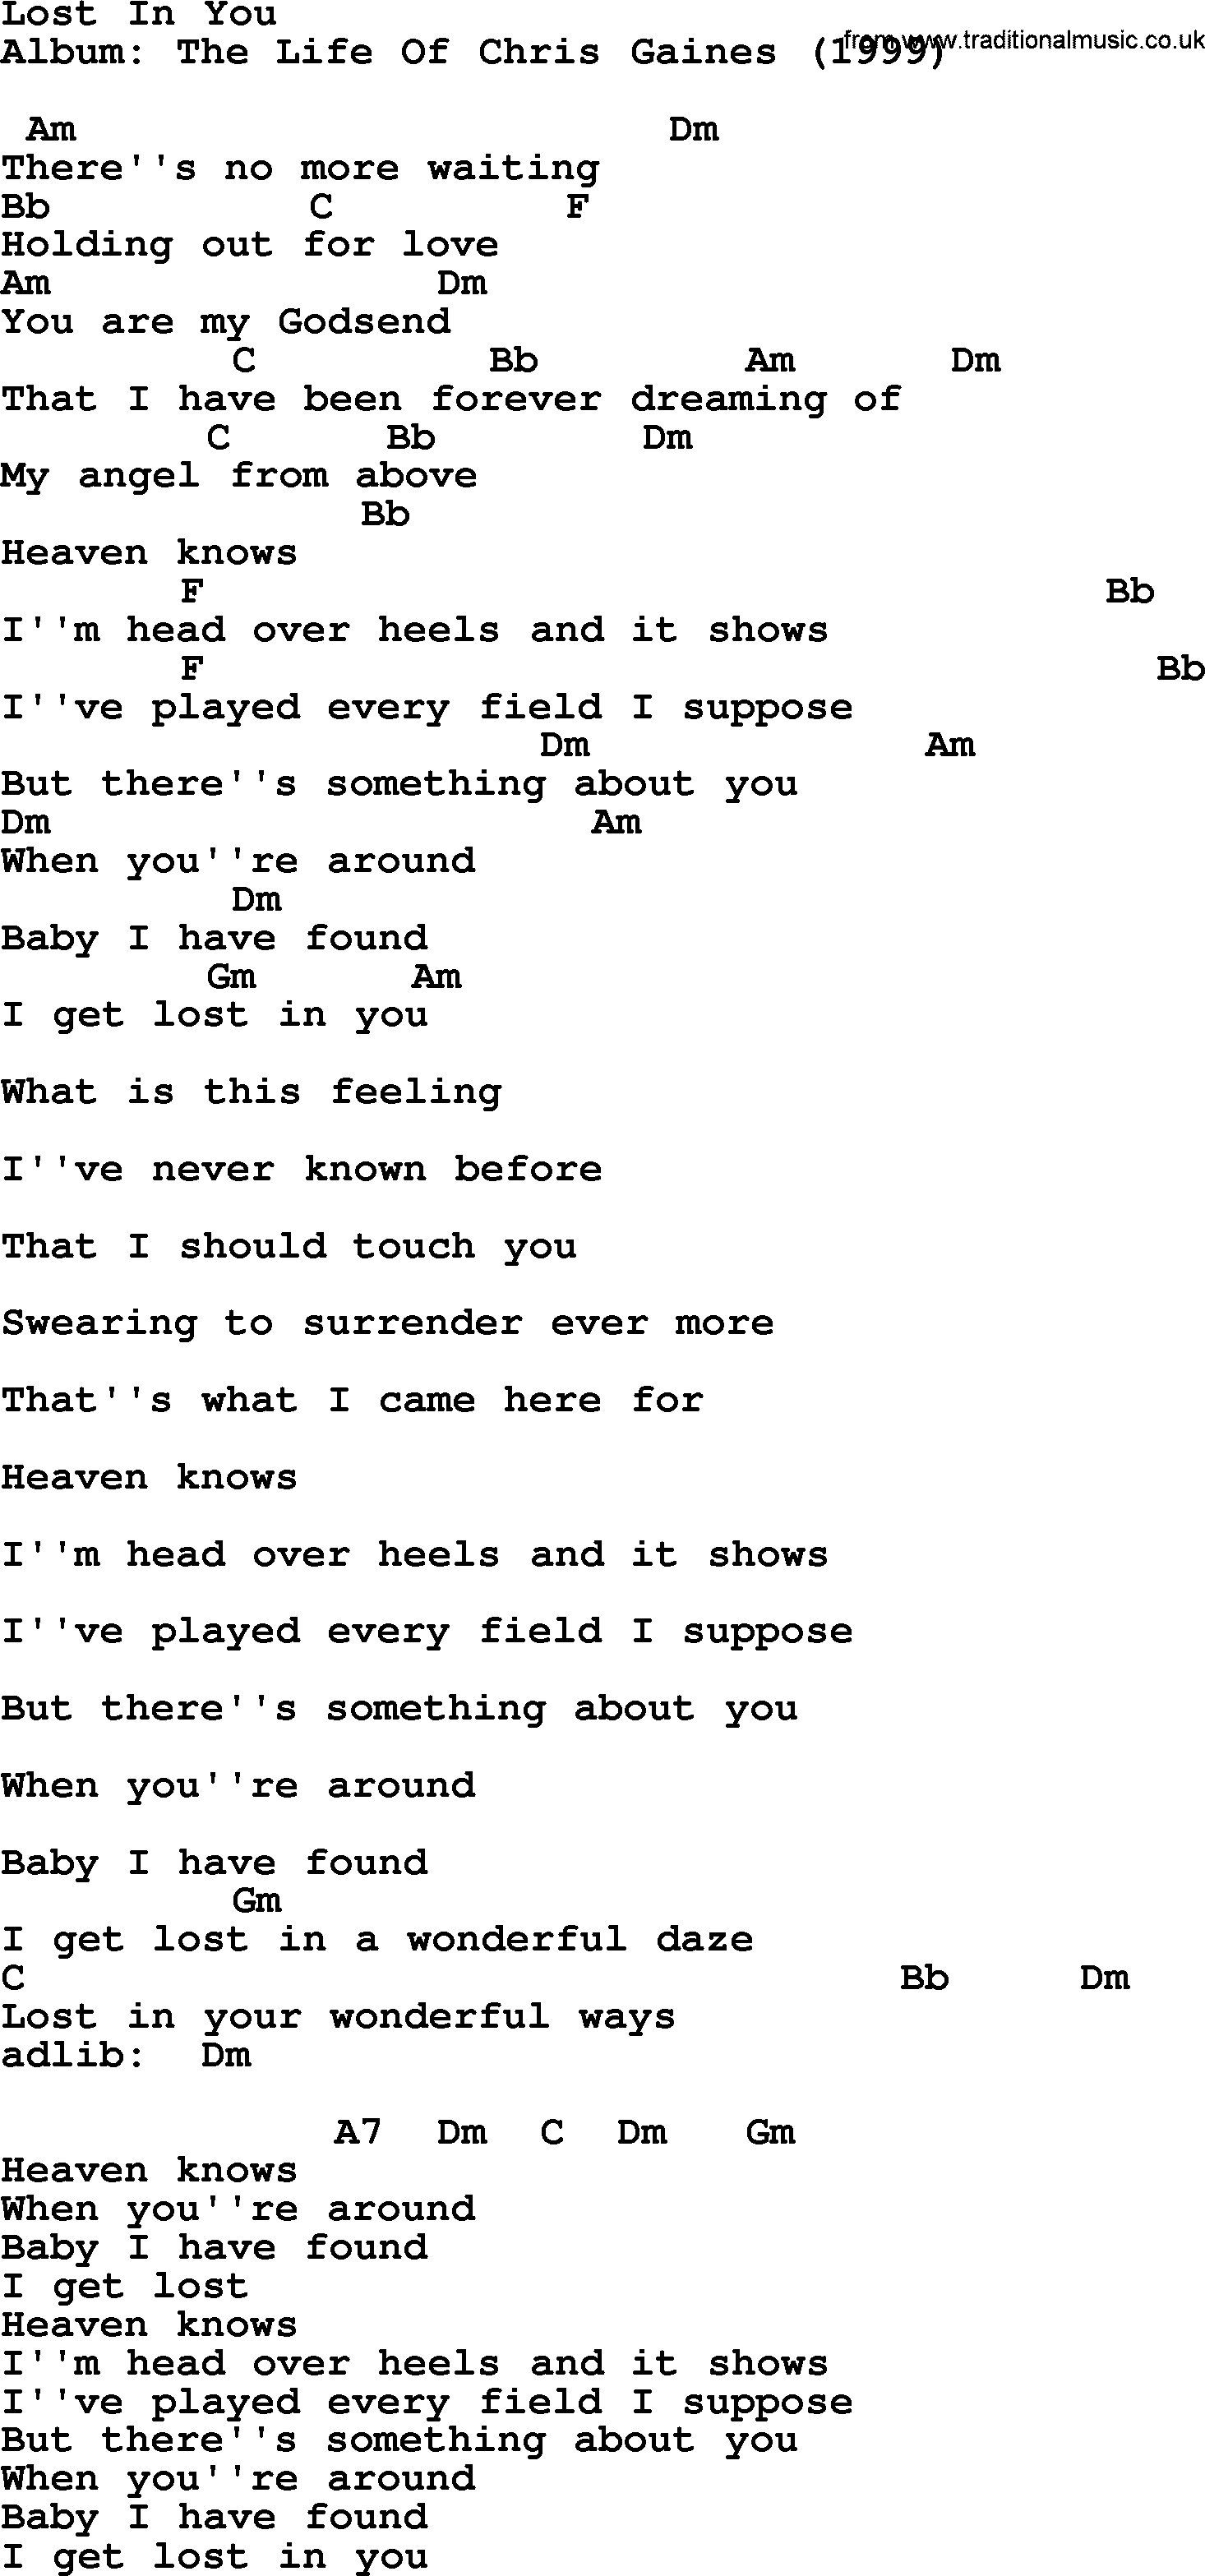 Garth Brooks song: Lost In You, lyrics and chords